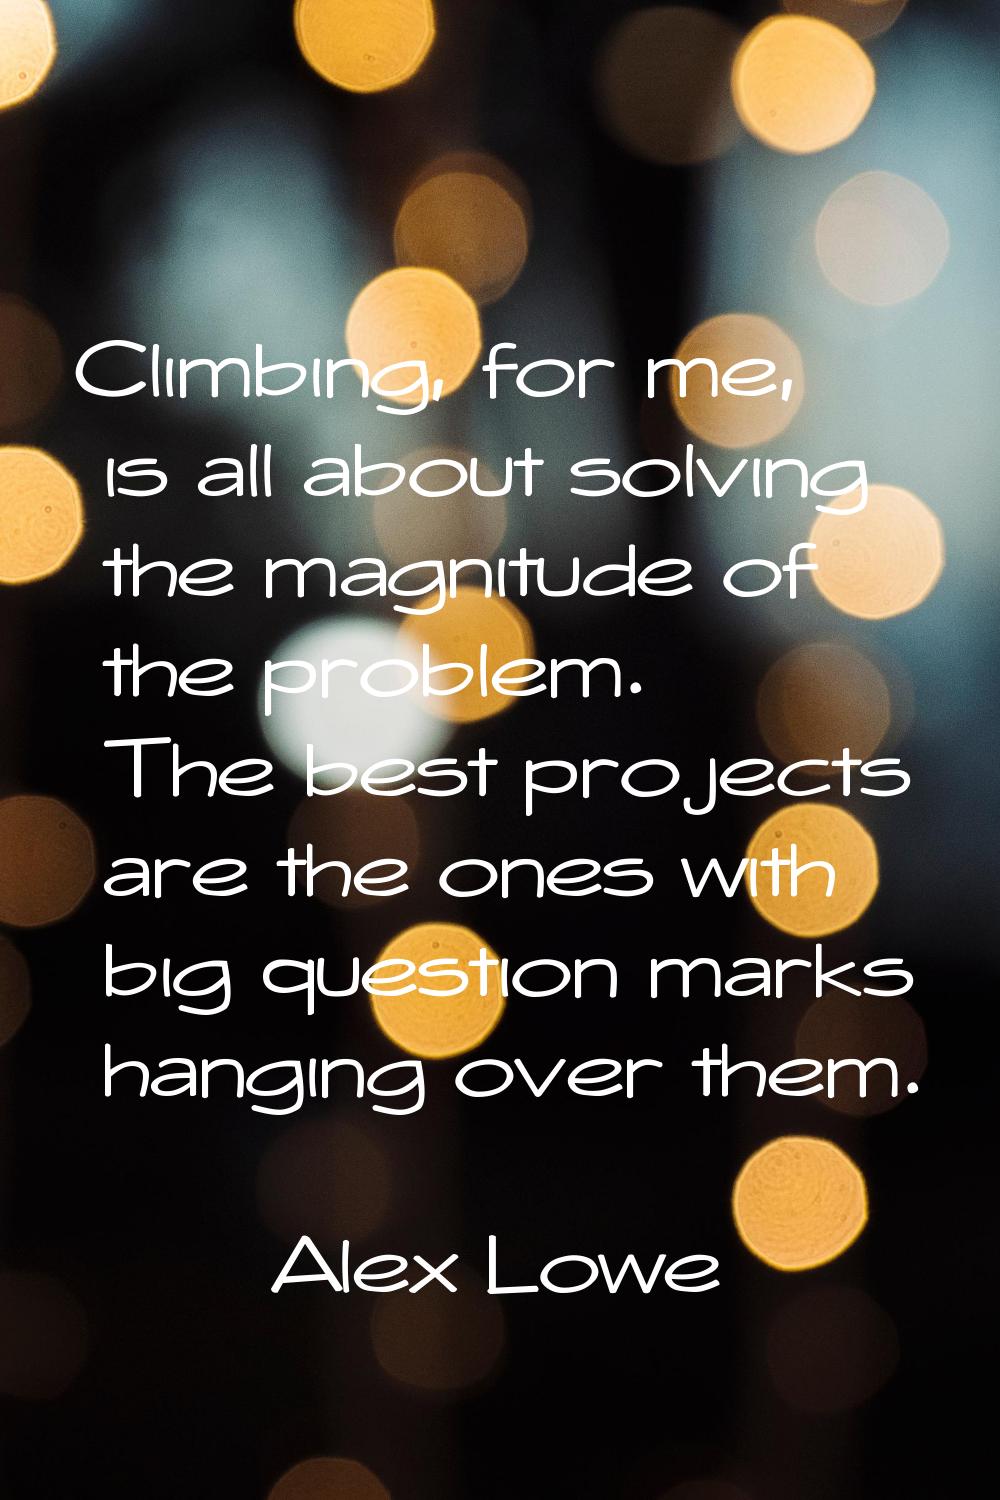 Climbing, for me, is all about solving the magnitude of the problem. The best projects are the ones